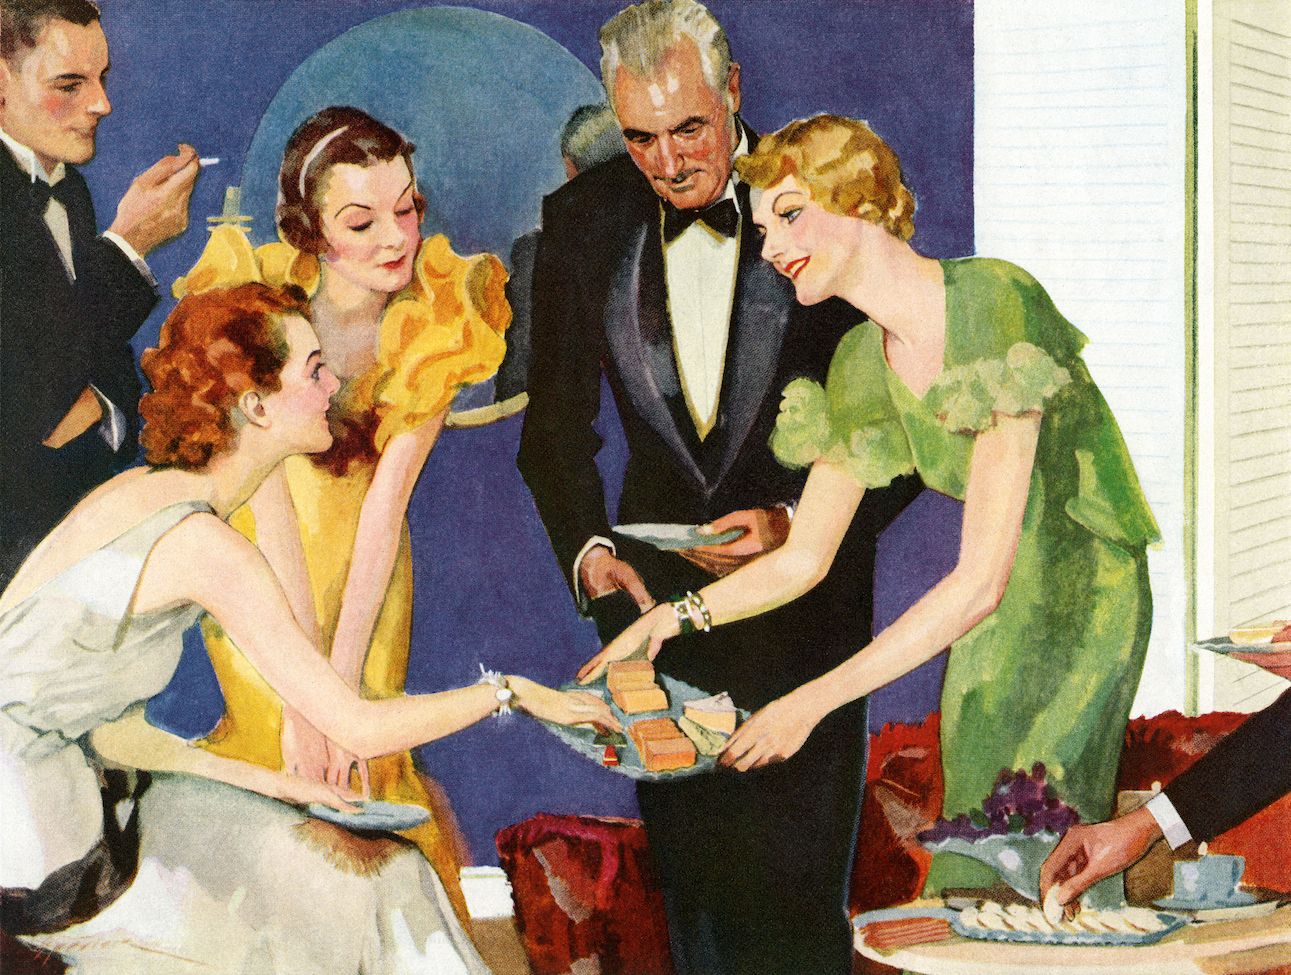 vintage illustration of a hostess serving cheese and crackers to her guests at a cocktail party screen print, 1933 photo by graphicaartisgetty images